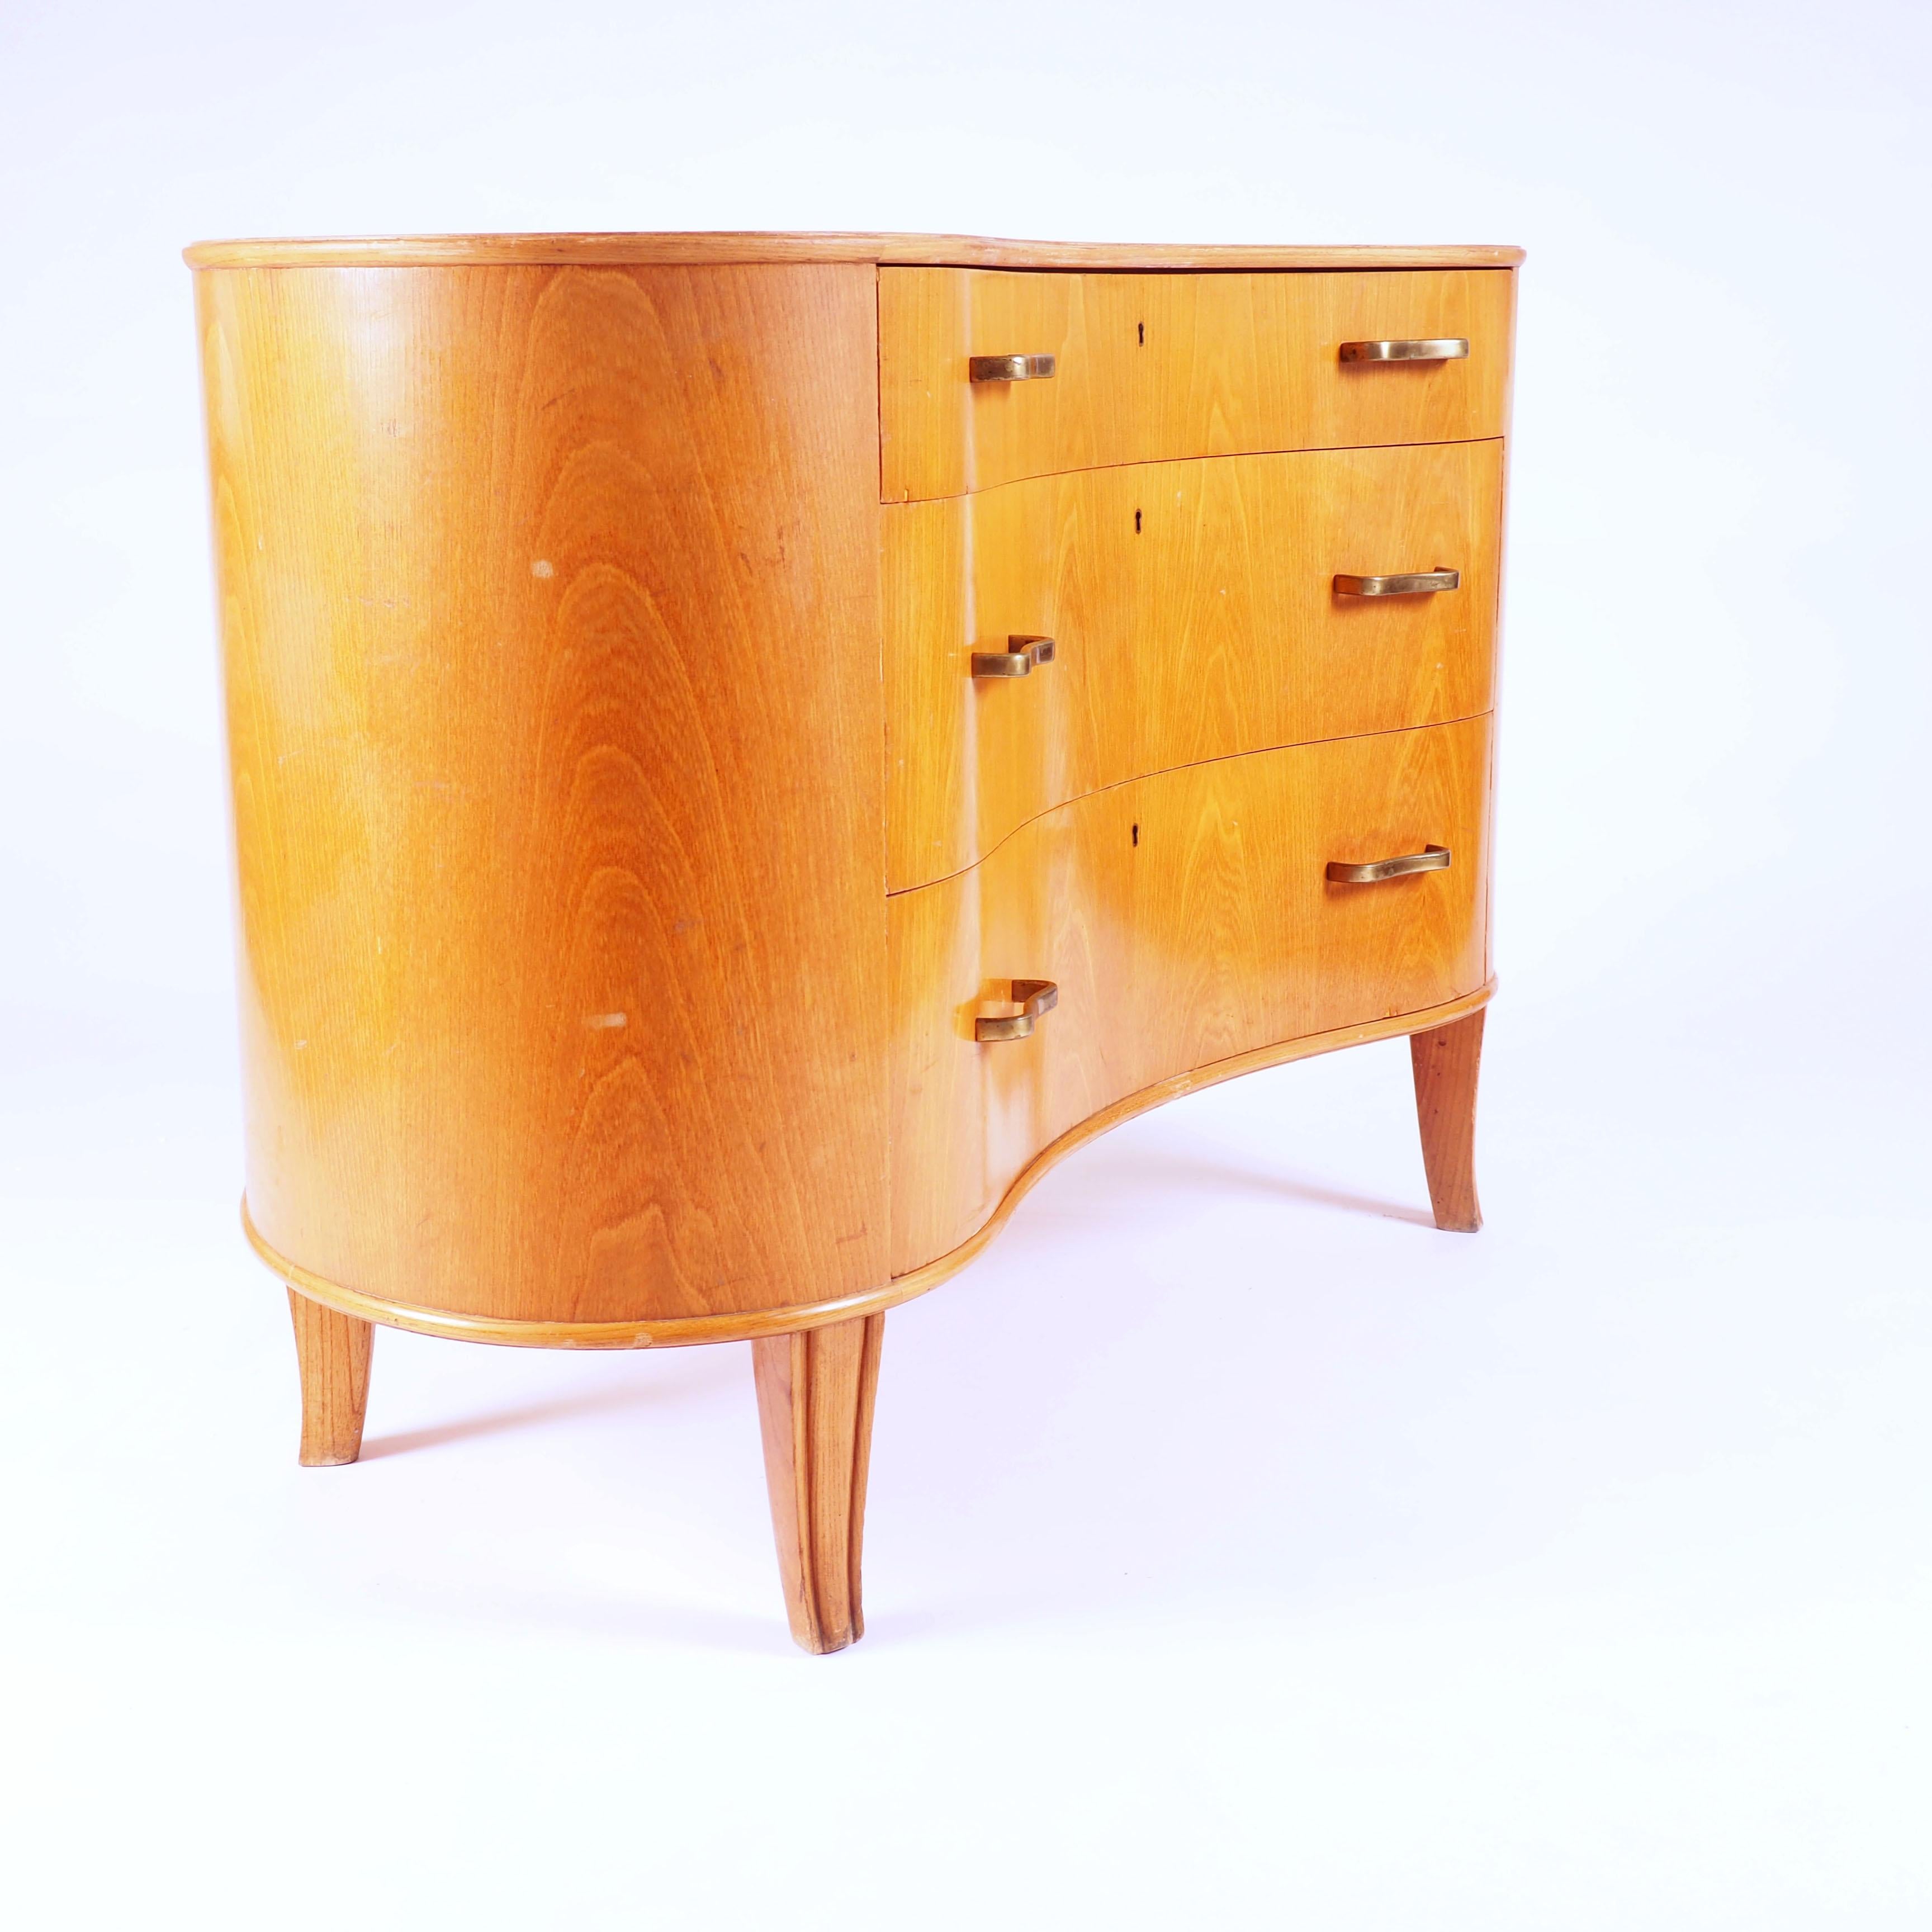 Scandinavian Modern Axel Larsson Kidney Shaped Chest of Drawers Made by Bodafors, Sweden For Sale